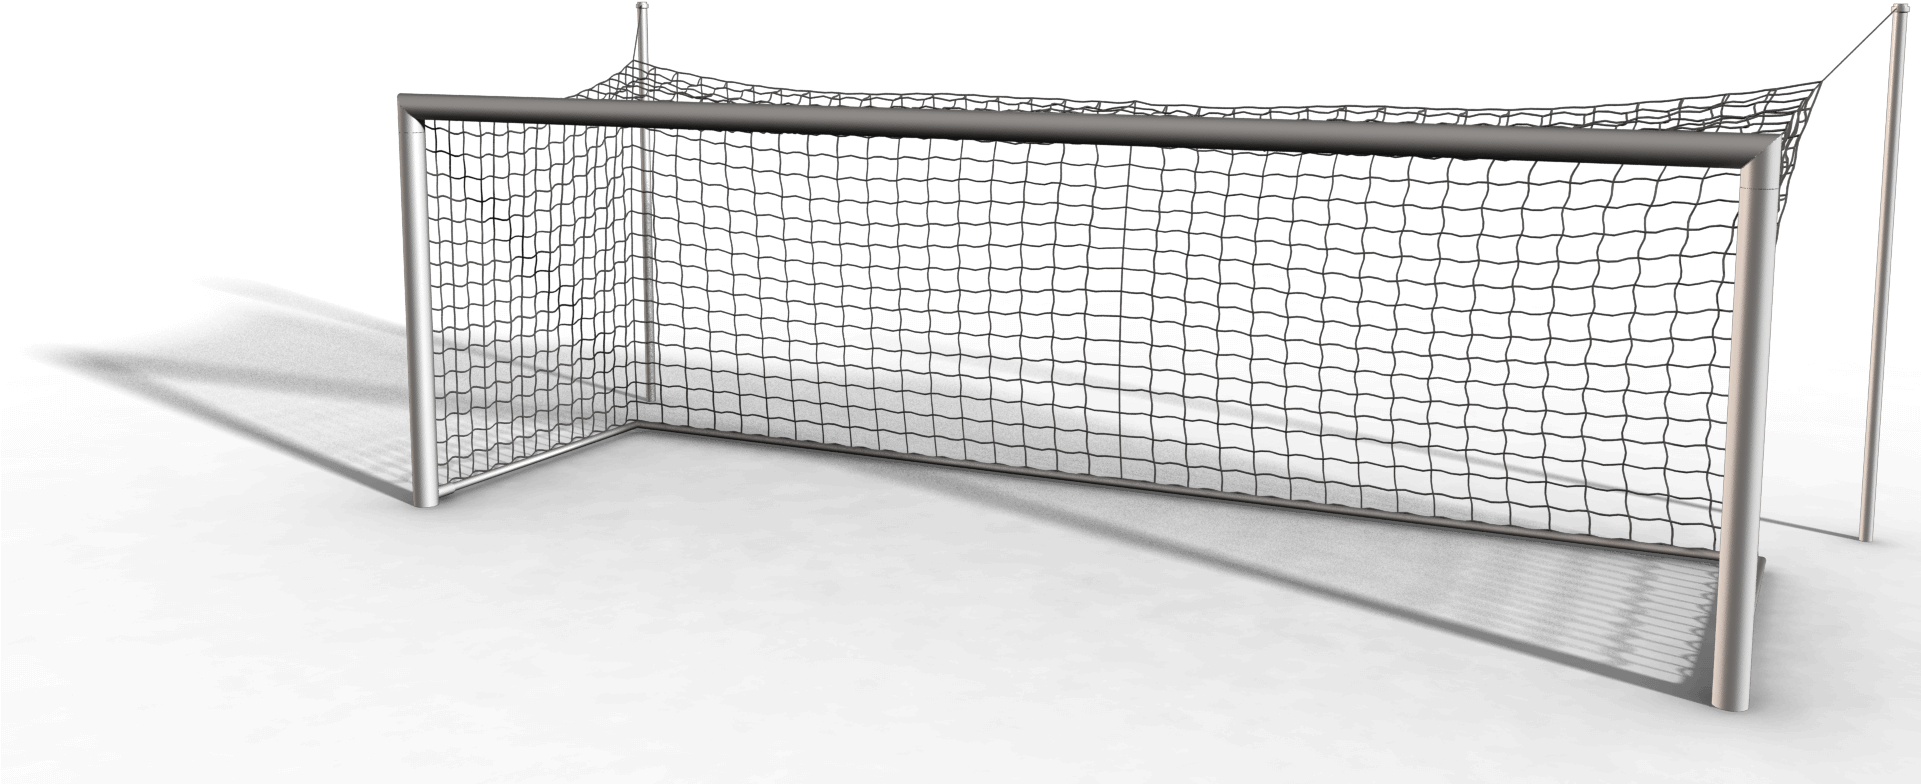 Download Football Goal Png Fixed Aluminium Soccer Goal Full Size W Sleeves Png Image With No Background Pngkey Com